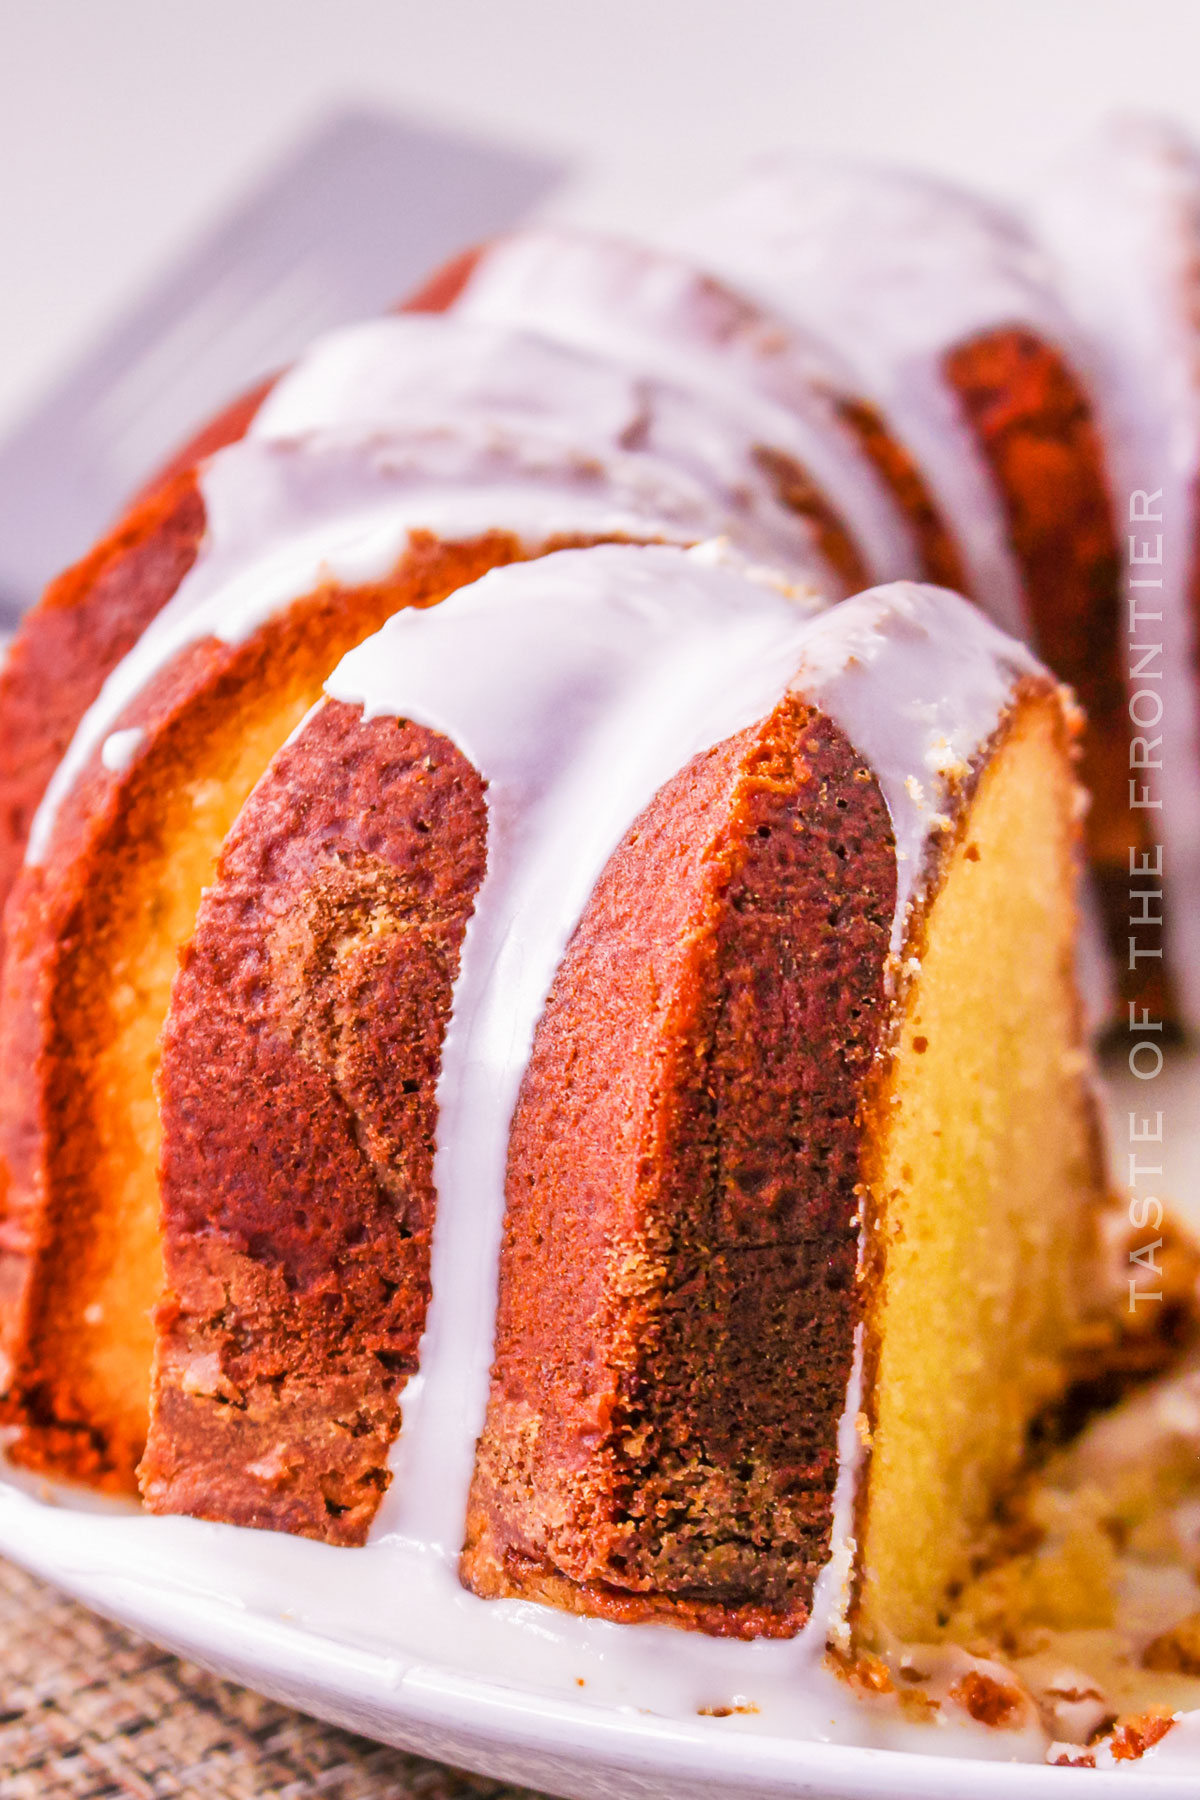 7-Up Pound Cake From Scratch